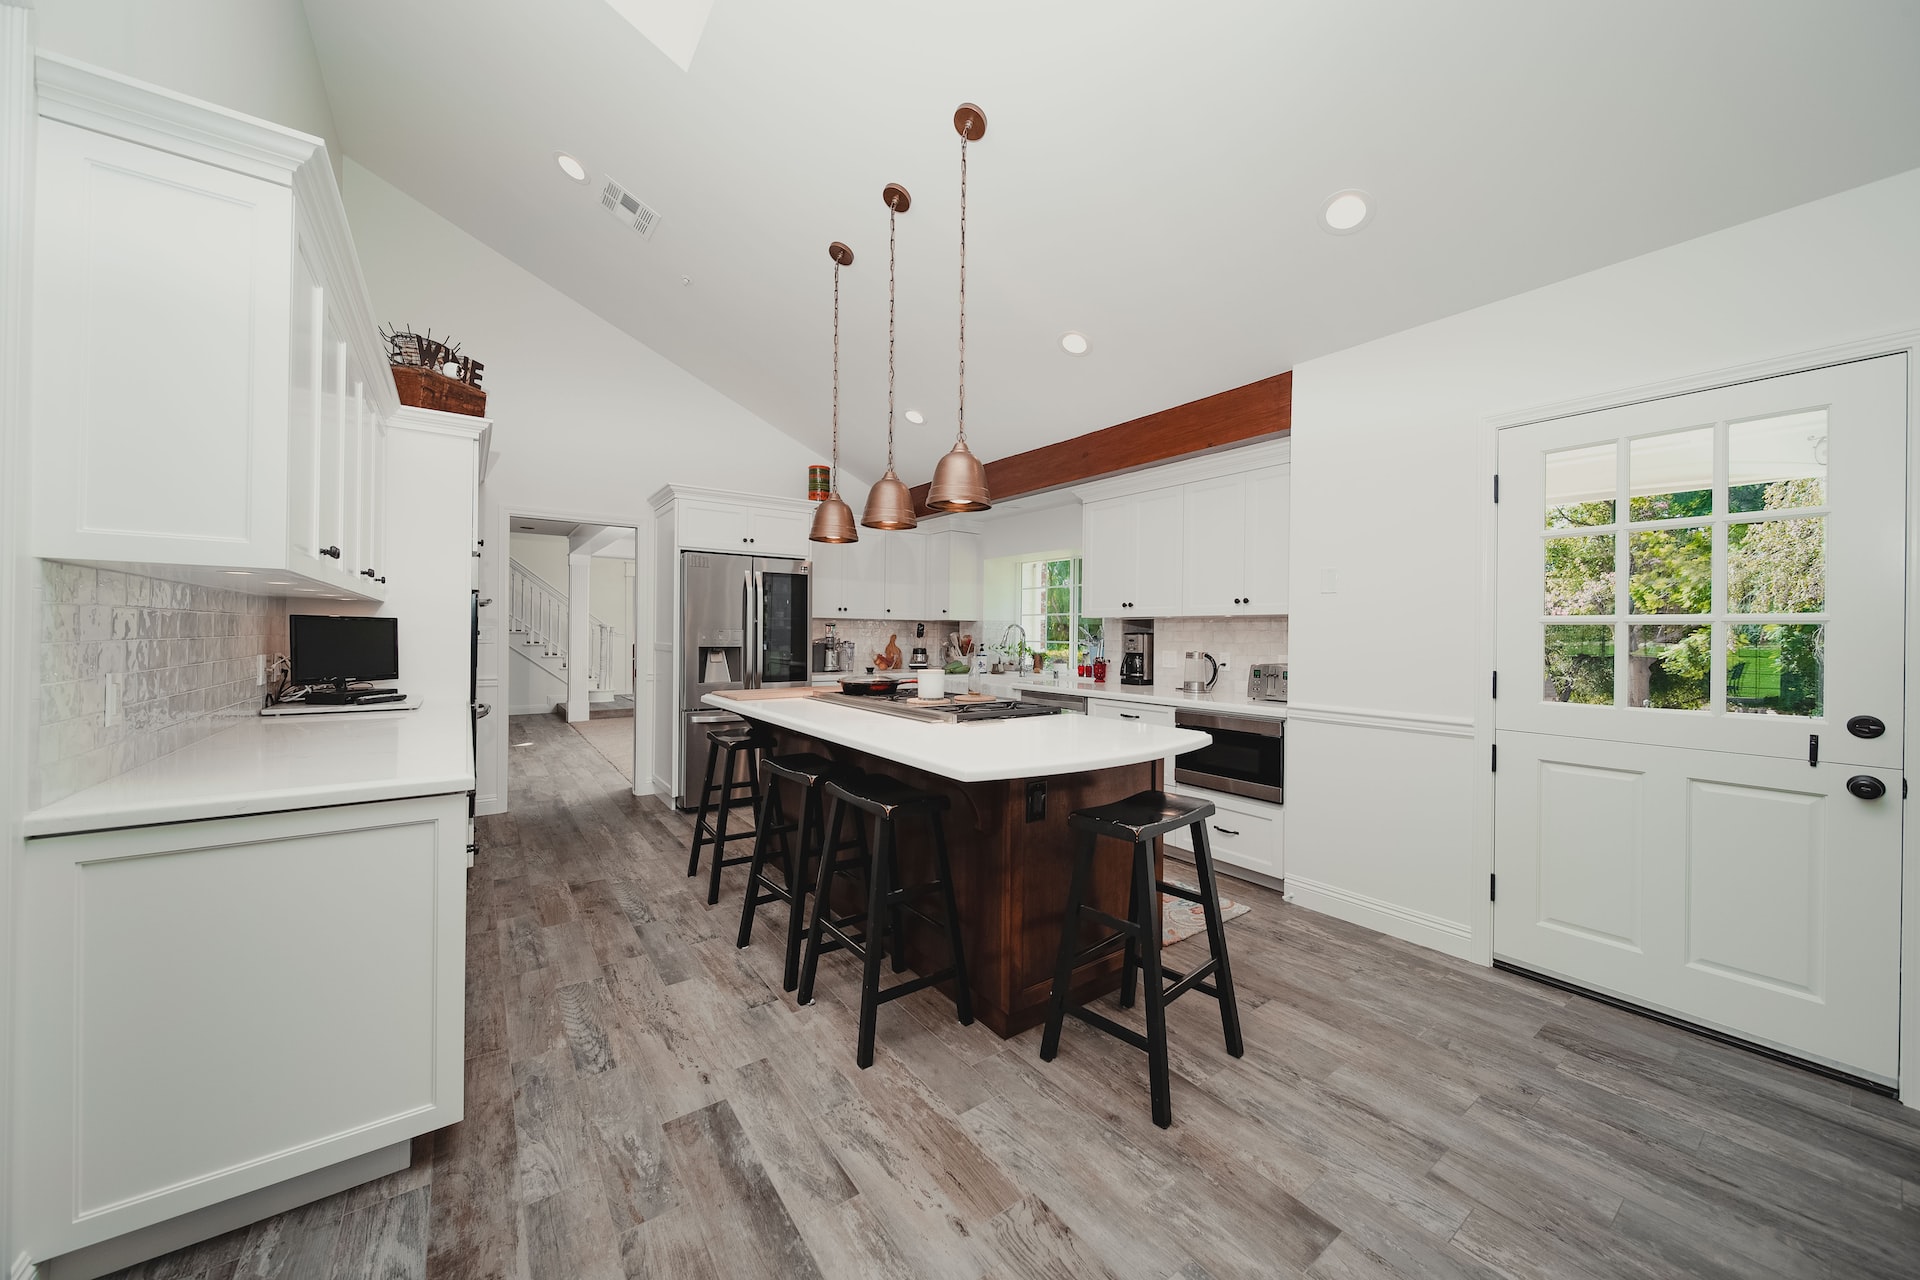 A white kitchen with wood floors and a center island incorporating copper accents.